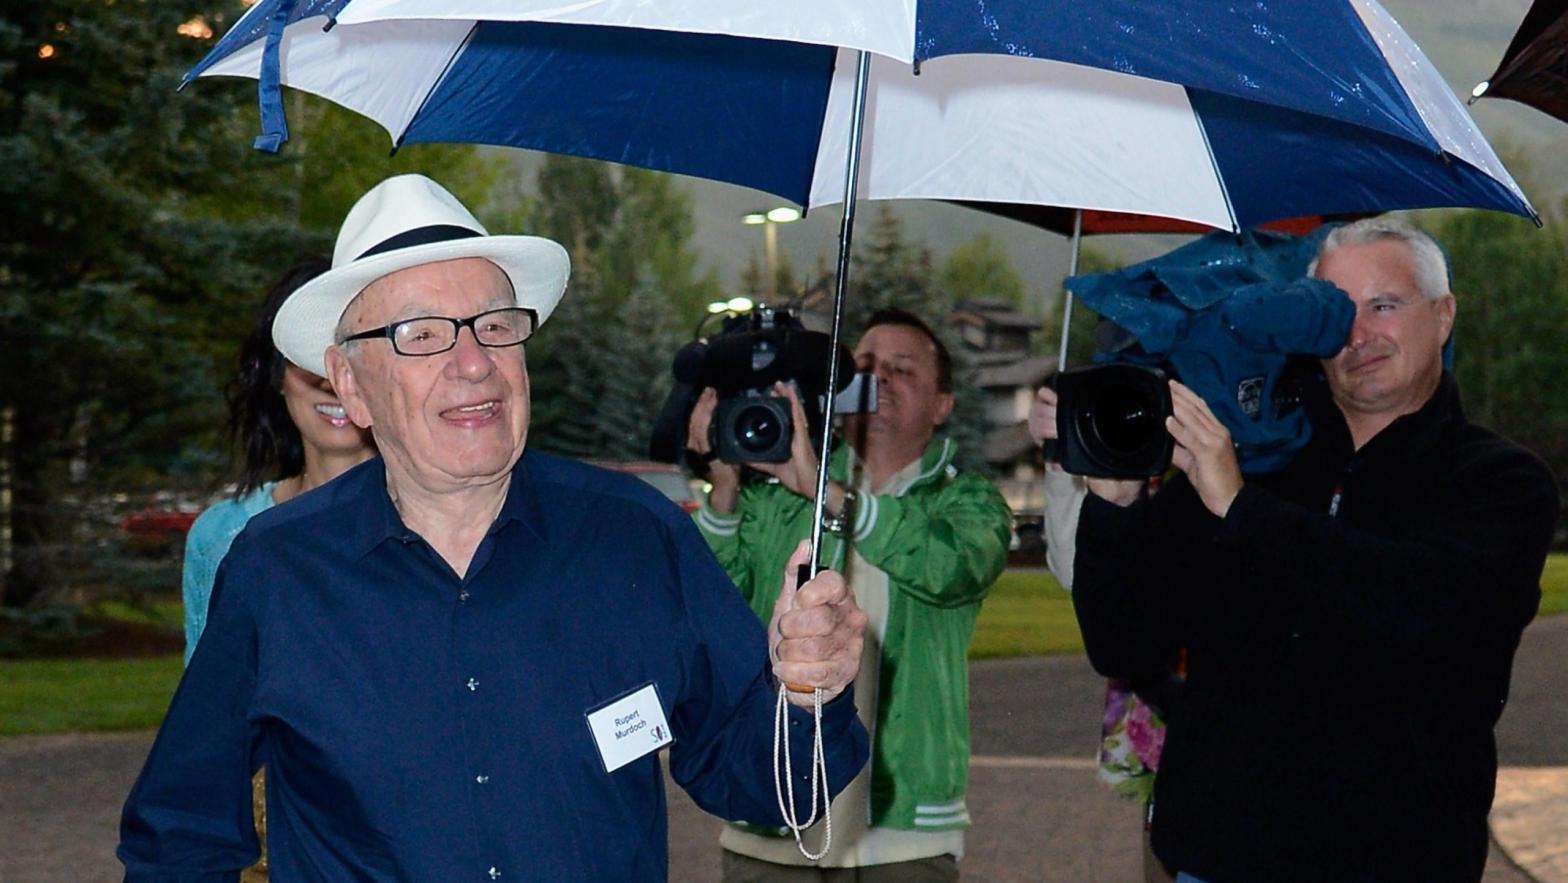 News Corp's Rupert Murdoch experiencing some weather. (Photo: Kevork Djansezian, Getty Images)